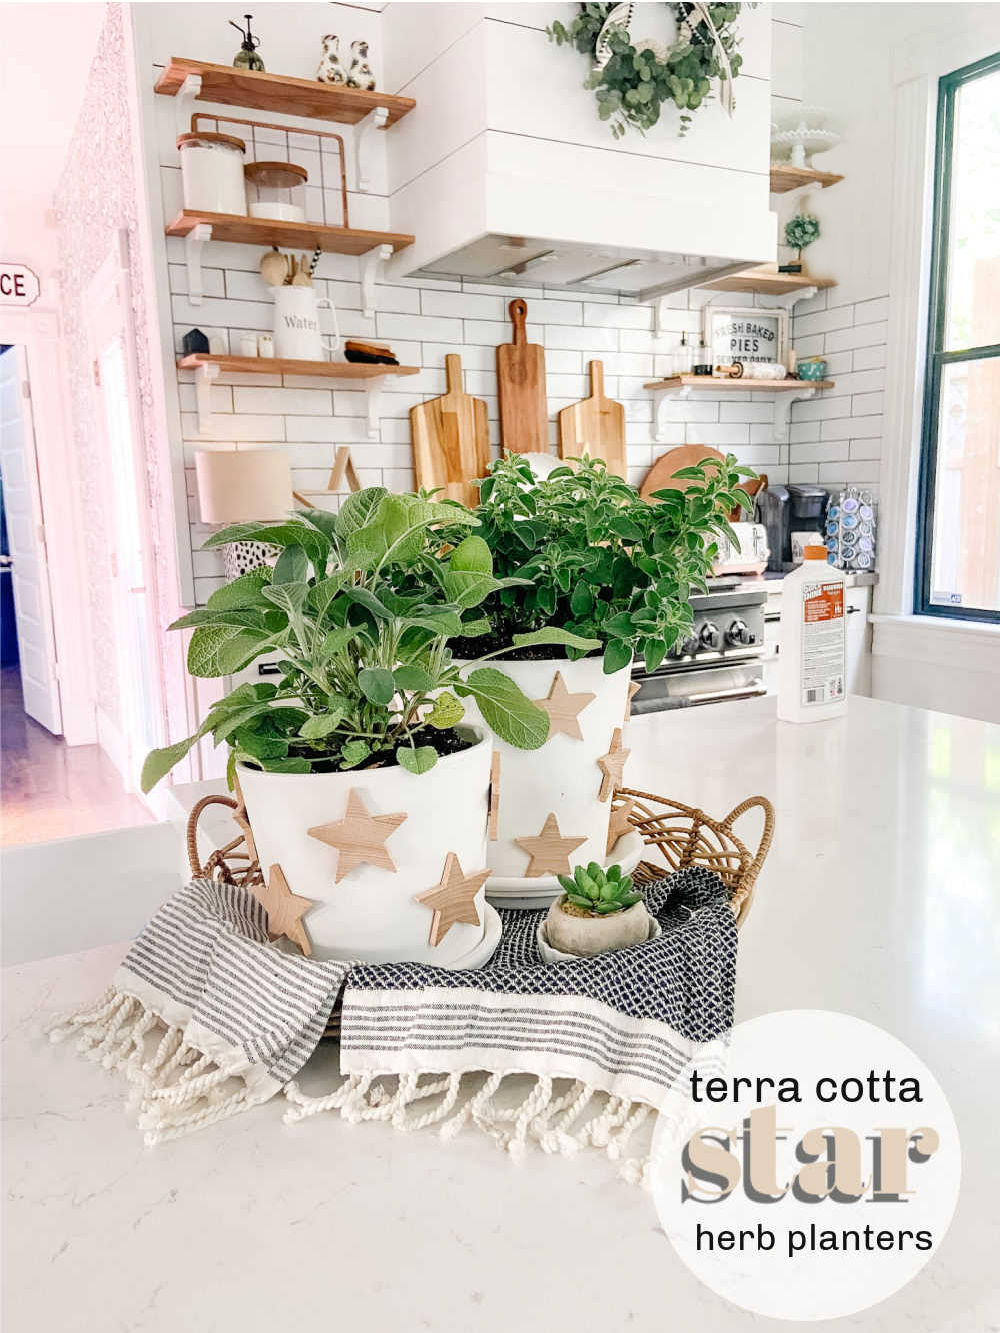 Terra Cotta Star Herb Planters. Create pretty farmhouse planters with natural wooden stars for your home or yard!